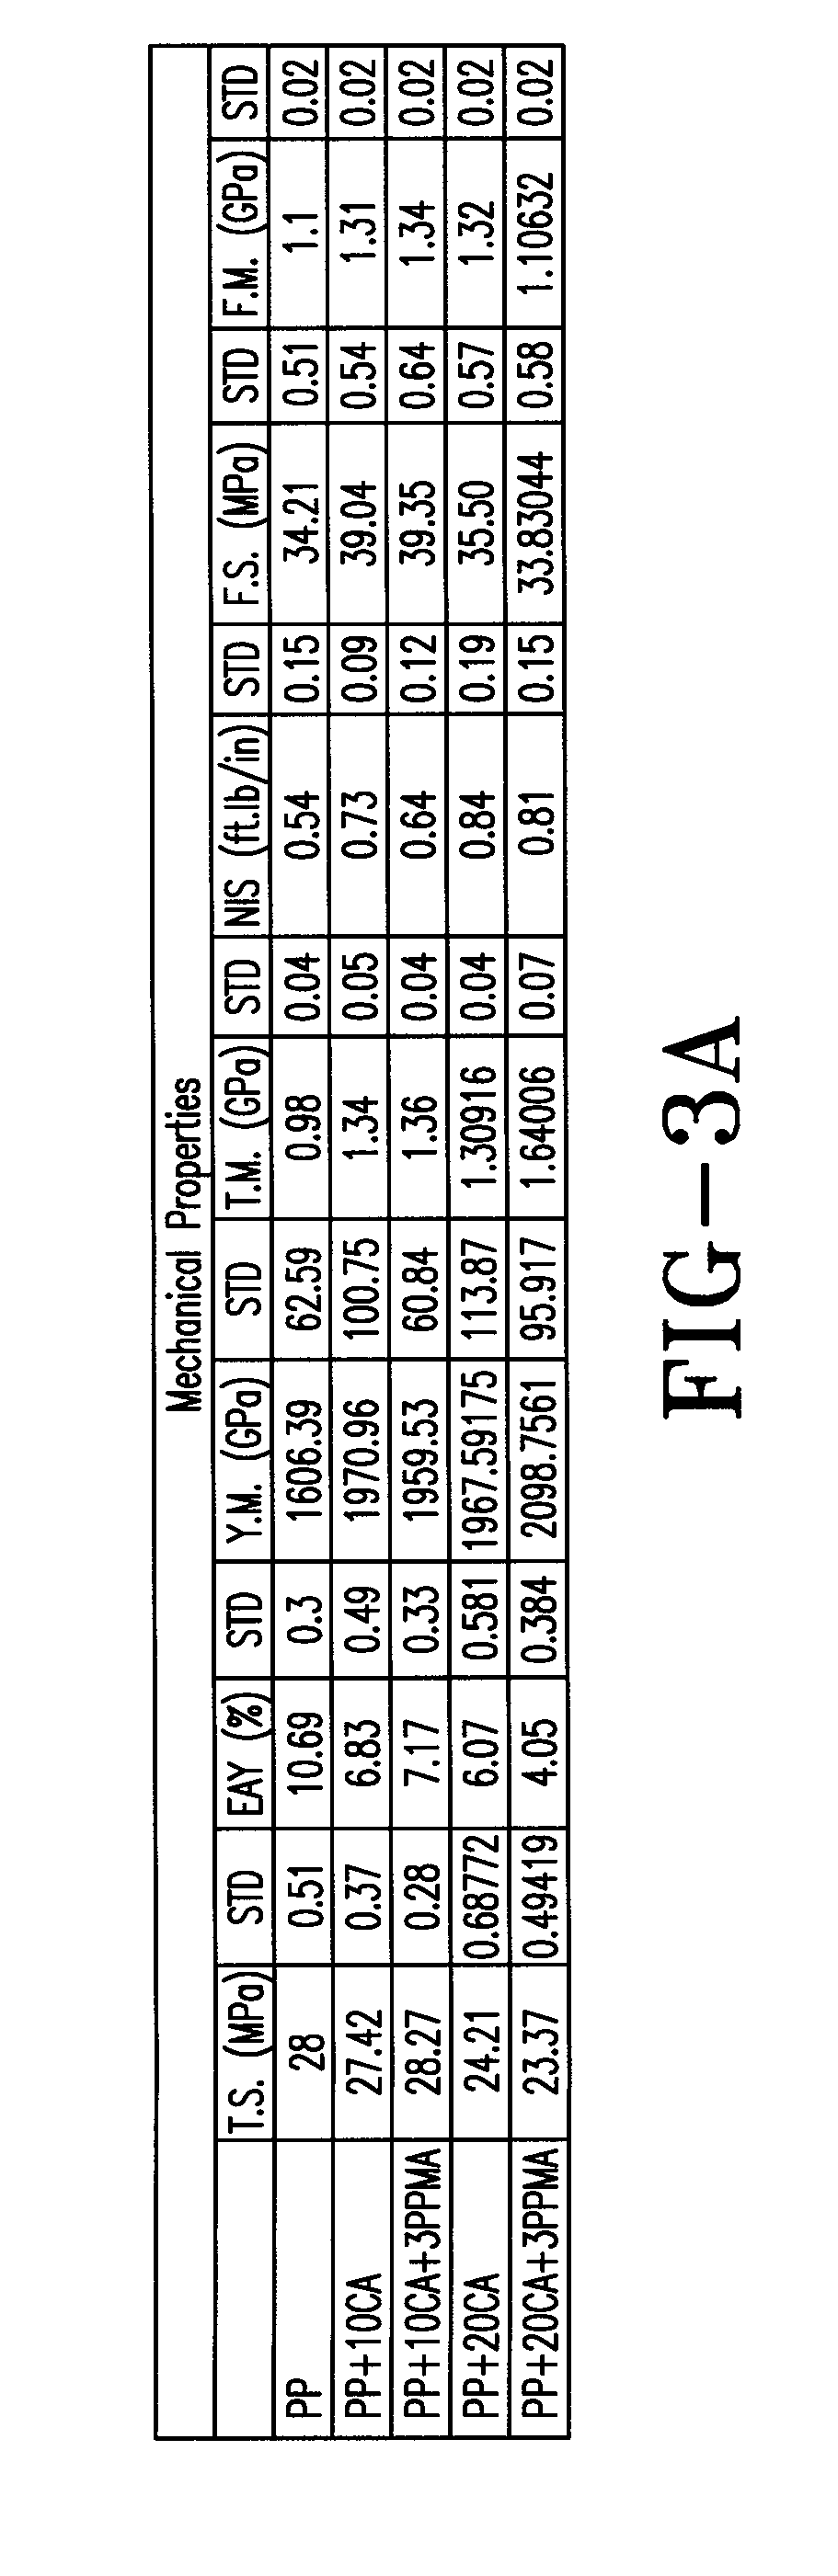 Process and Method for Cellulose Acetate Manufacturing Waste Product Recycling